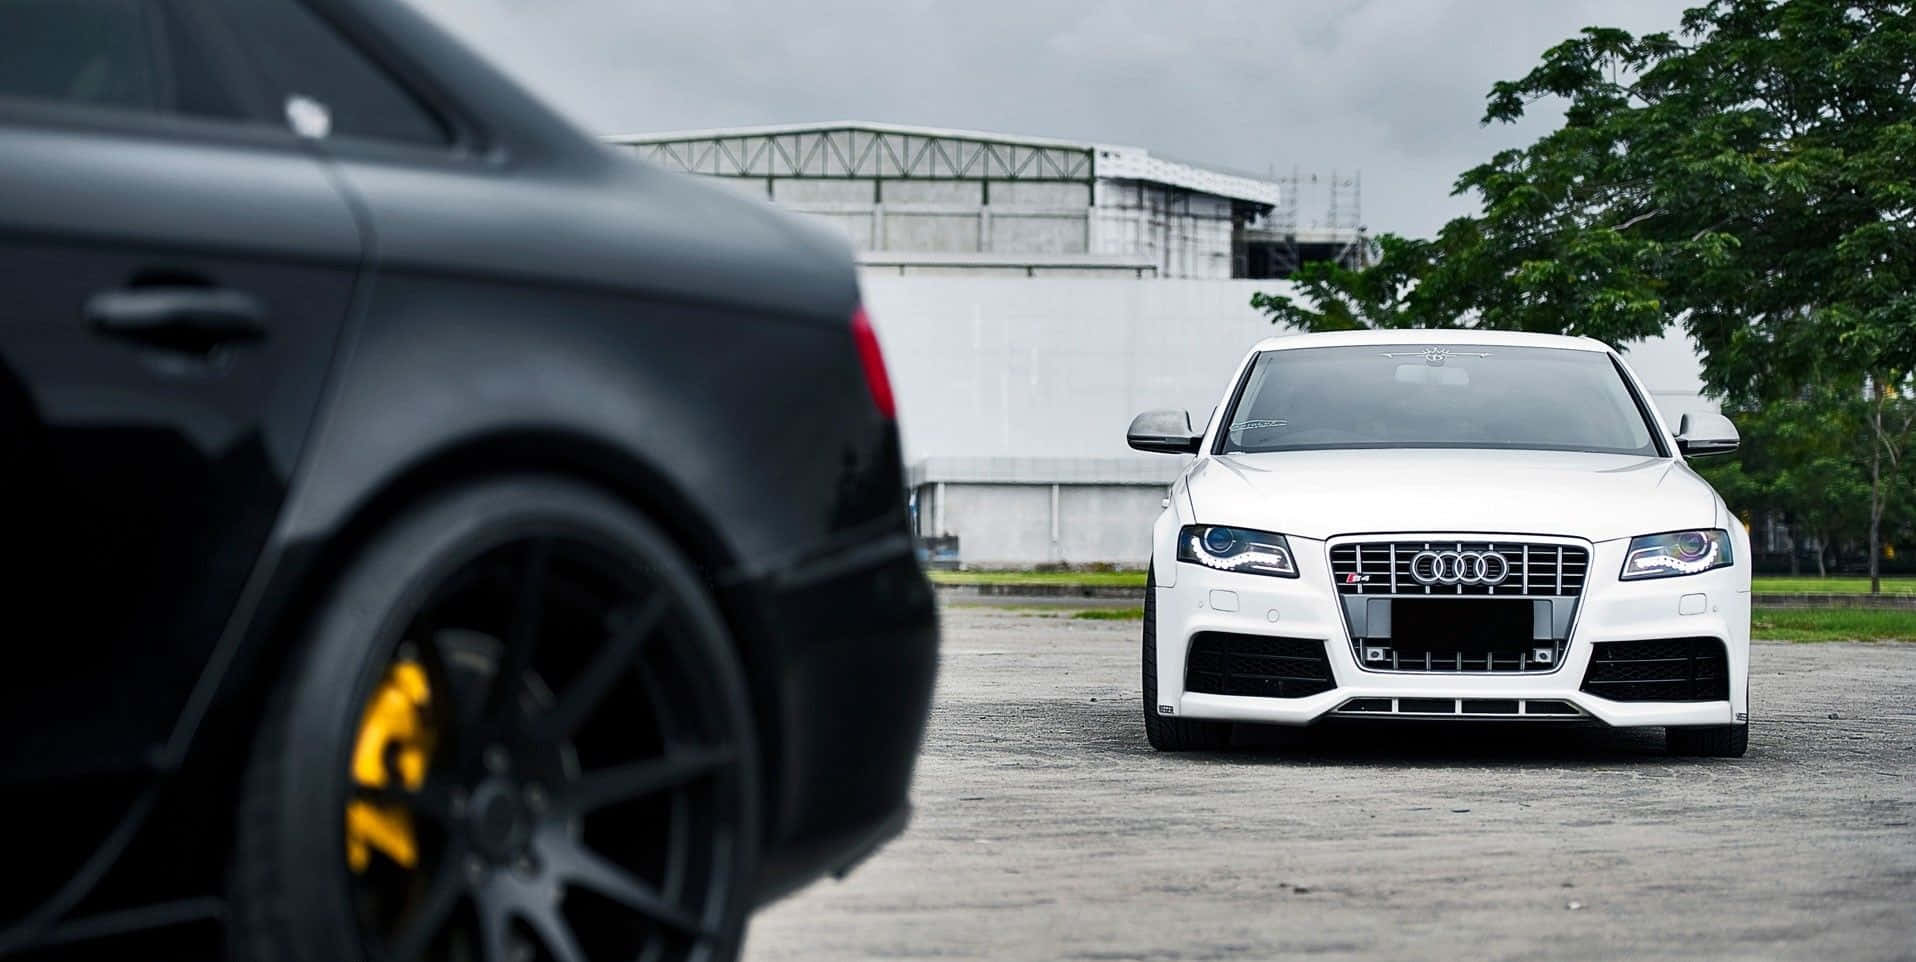 Sleek and Powerful Audi S4 in Motion Wallpaper